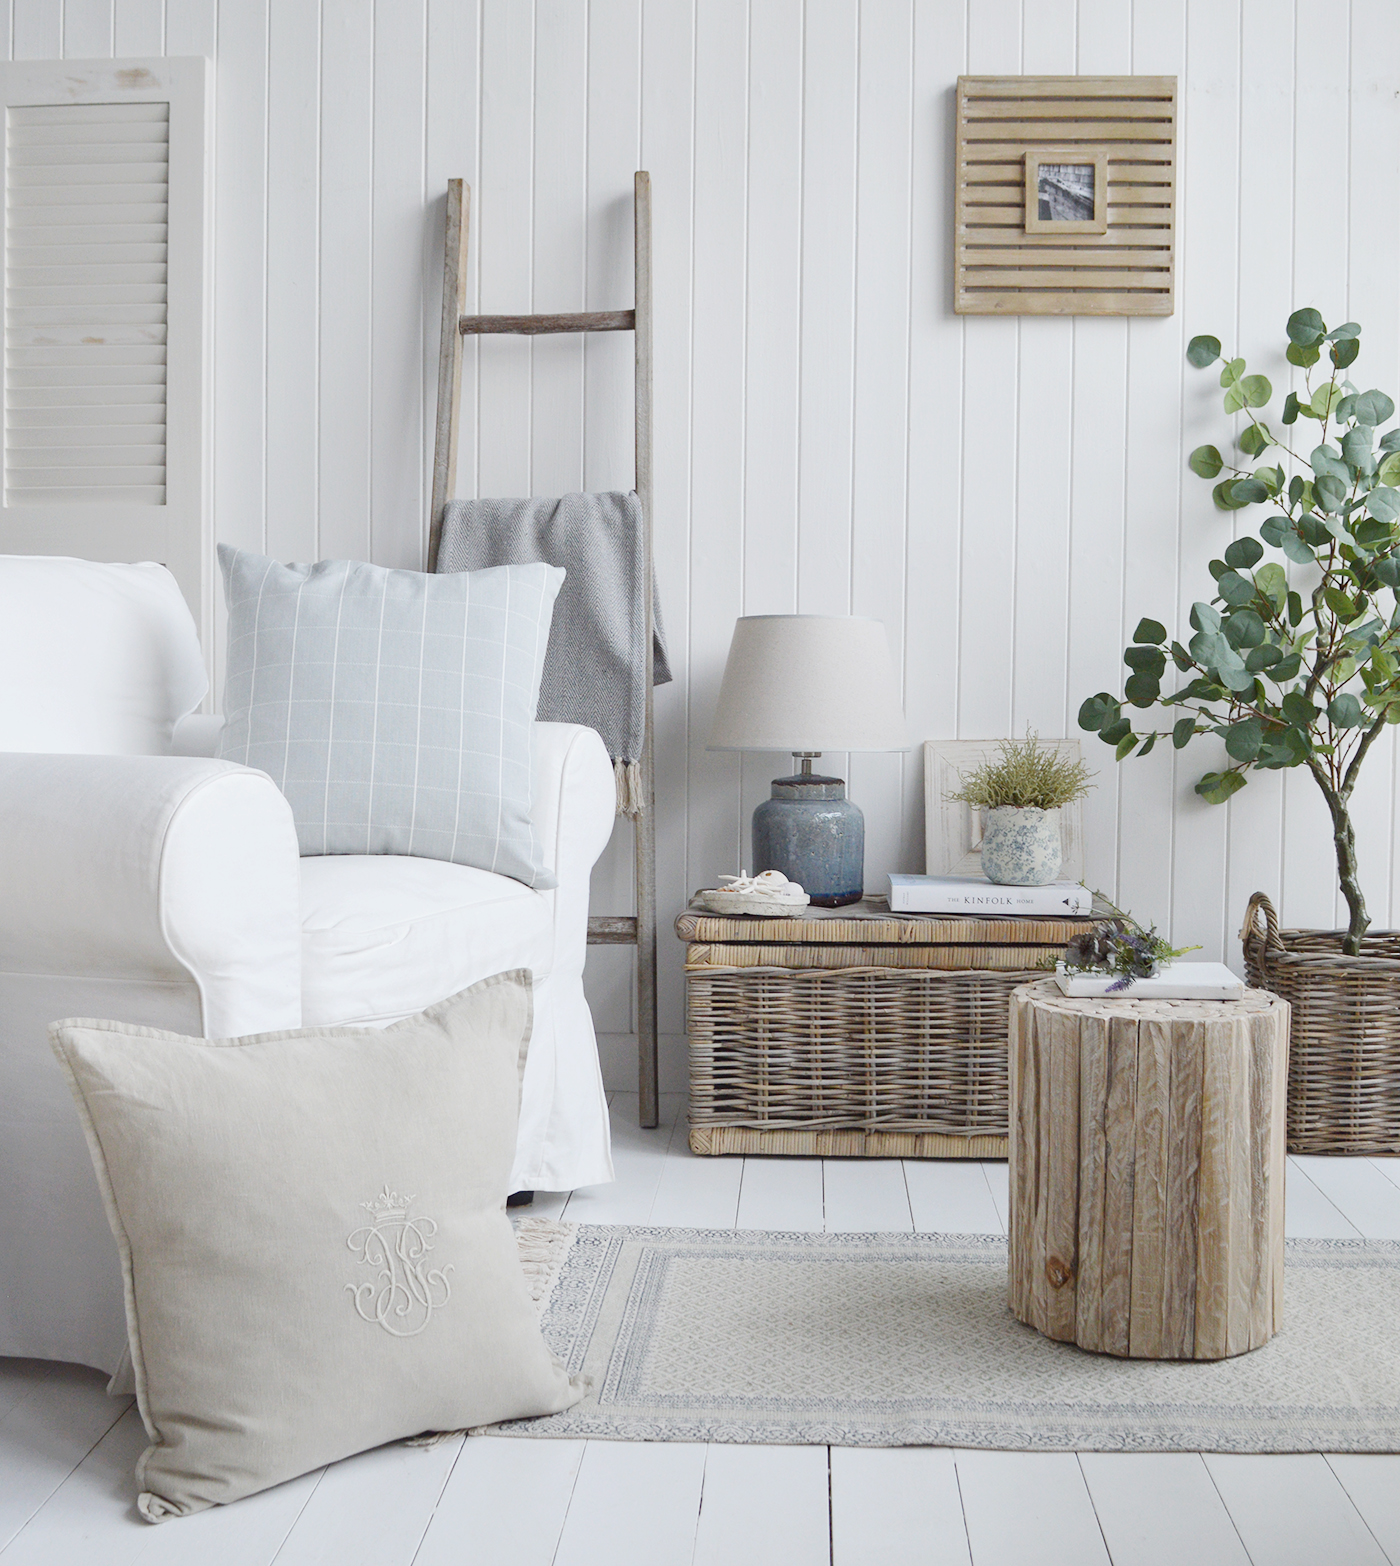 New England and Hamptons interiors in UK. Coastal furniture with luxury cushions for softness, baskets for texture, natural wood pieces of furniture for warmth and a touch of greenery alongside the Blue Compton lamp and ceramic pieces